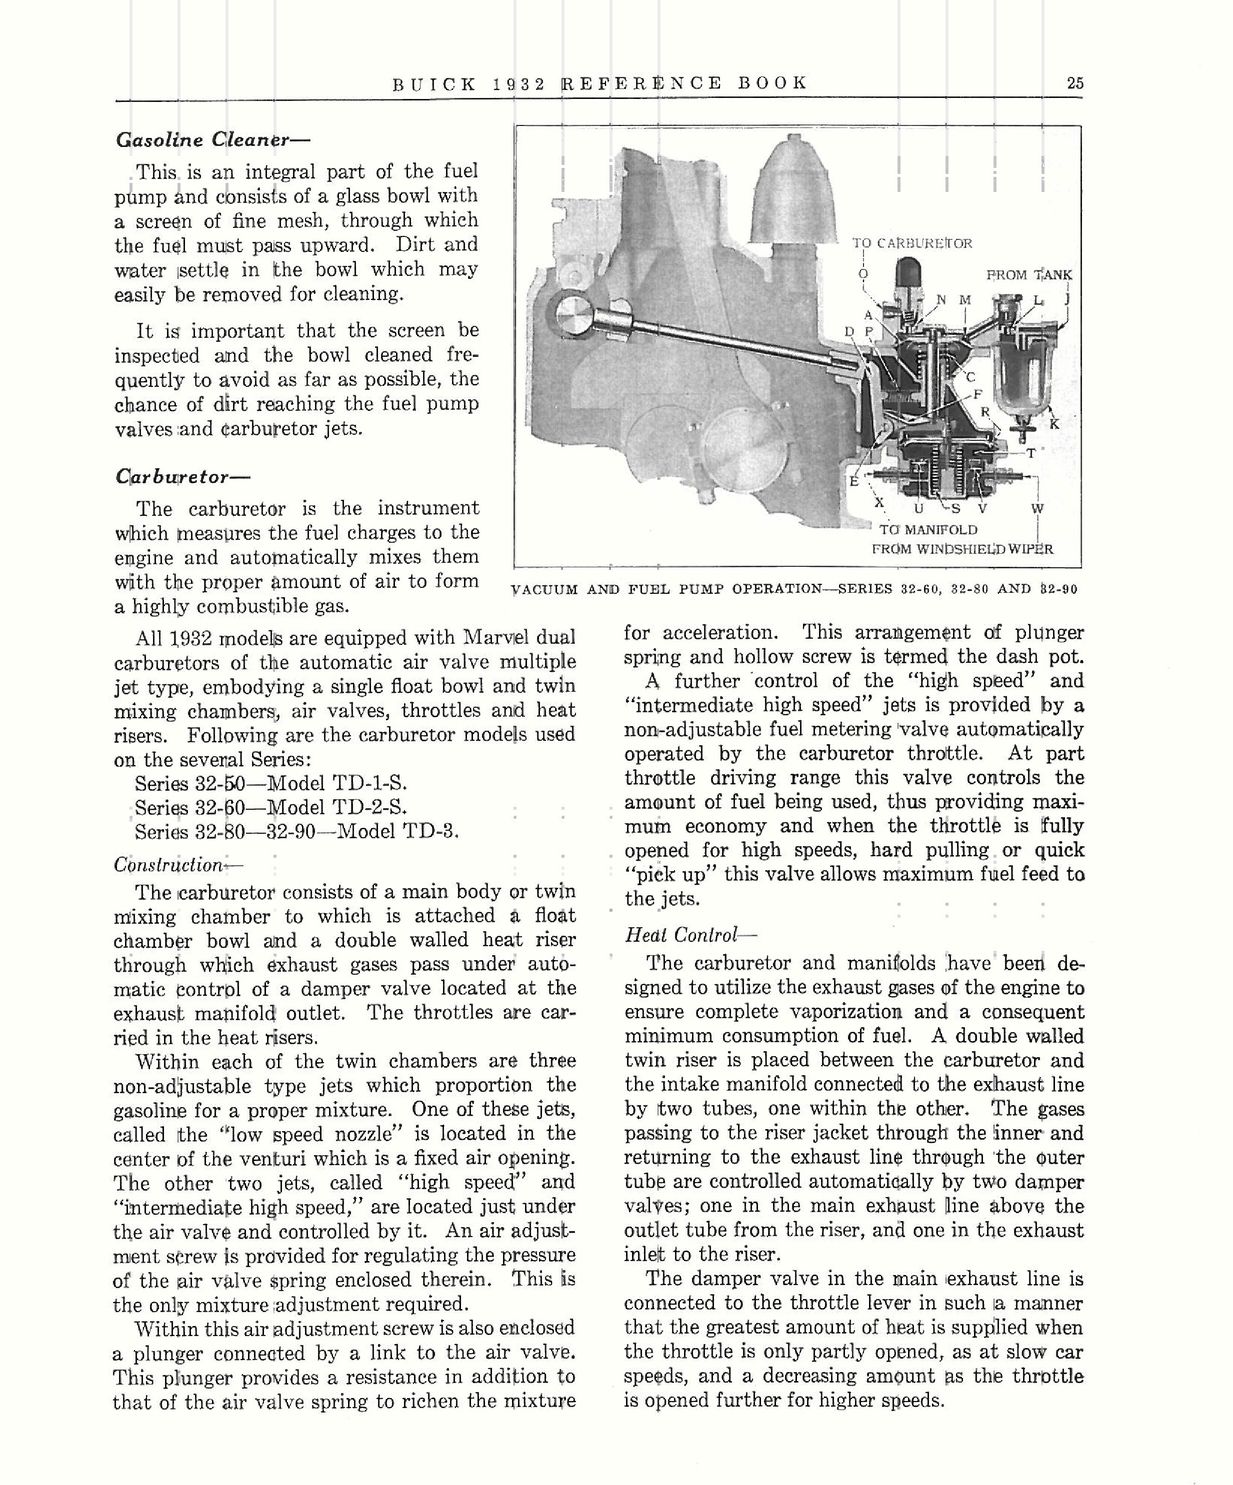 n_1932 Buick Reference Book-25.jpg